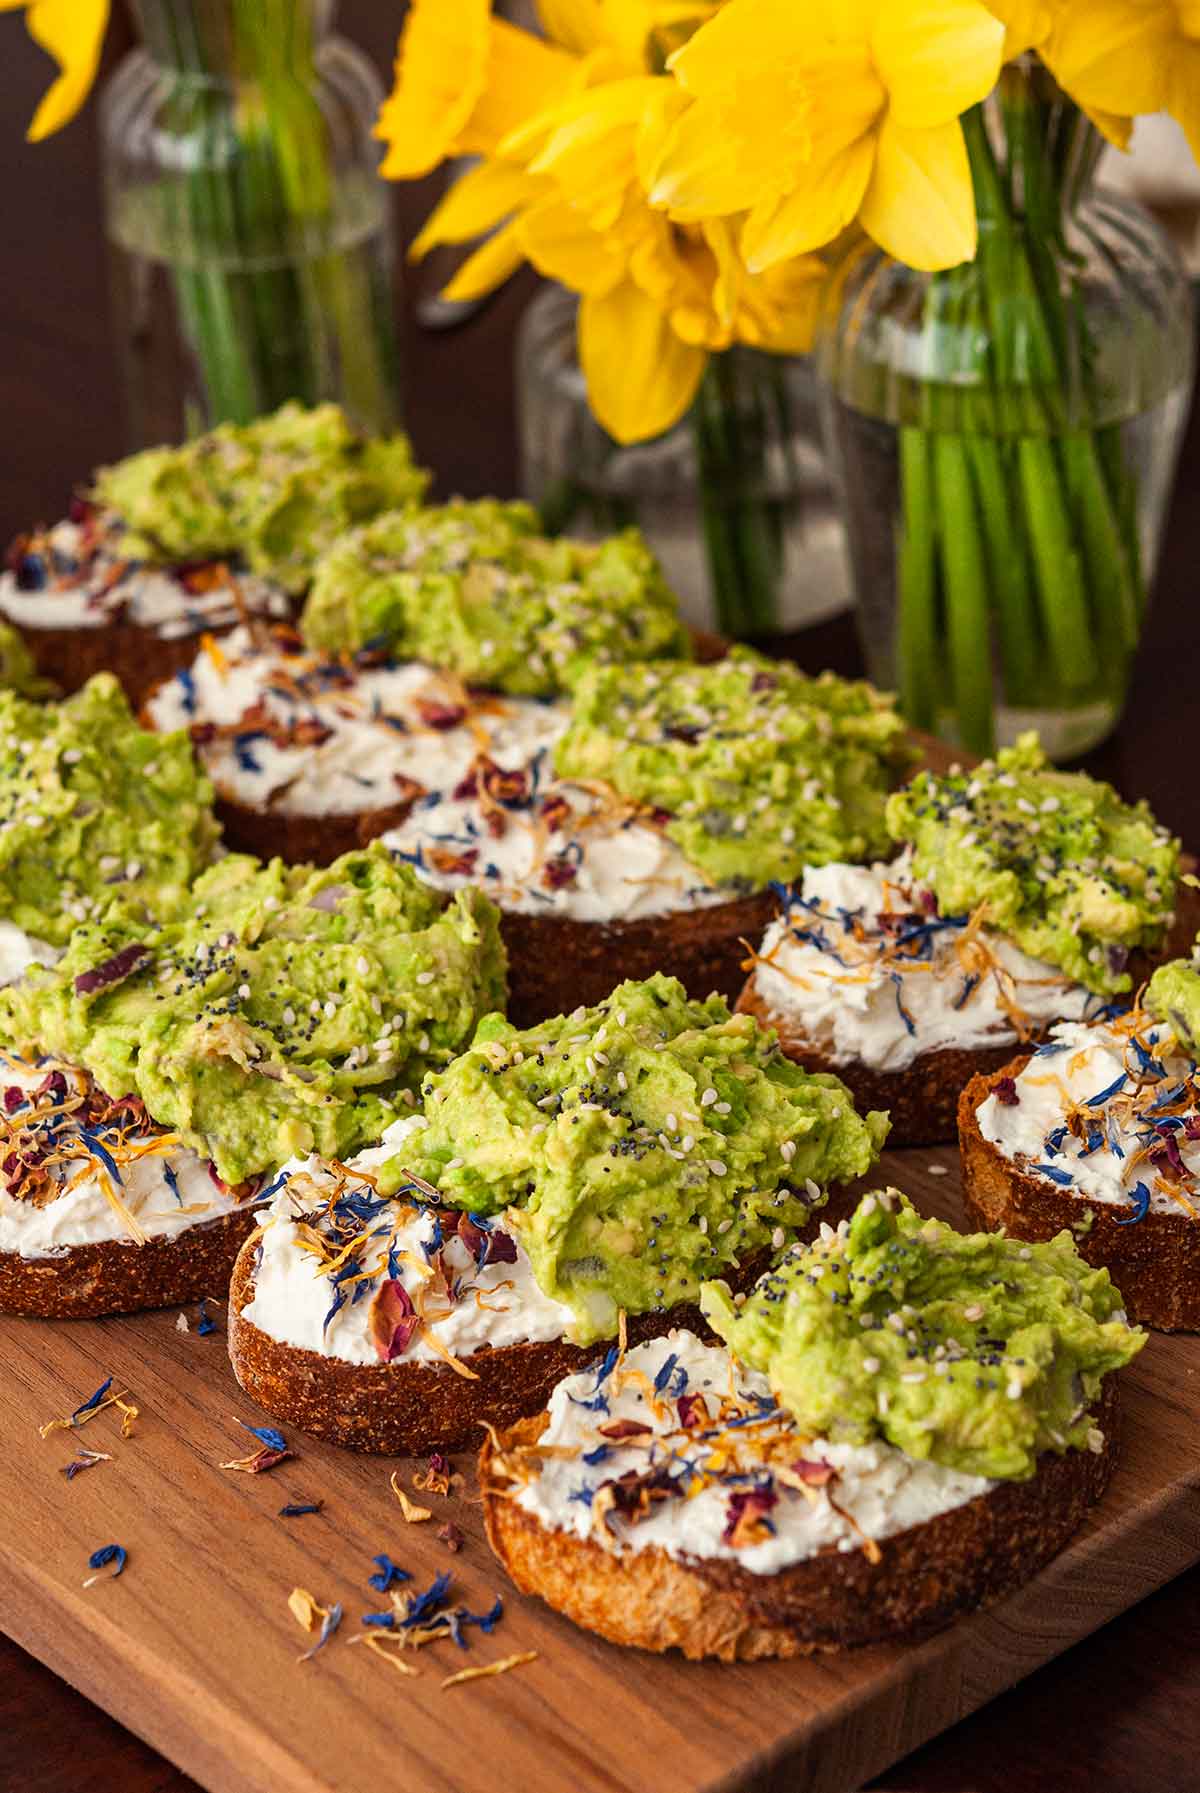 10 avocado toasts on a cutting board beside vases of daffodils.